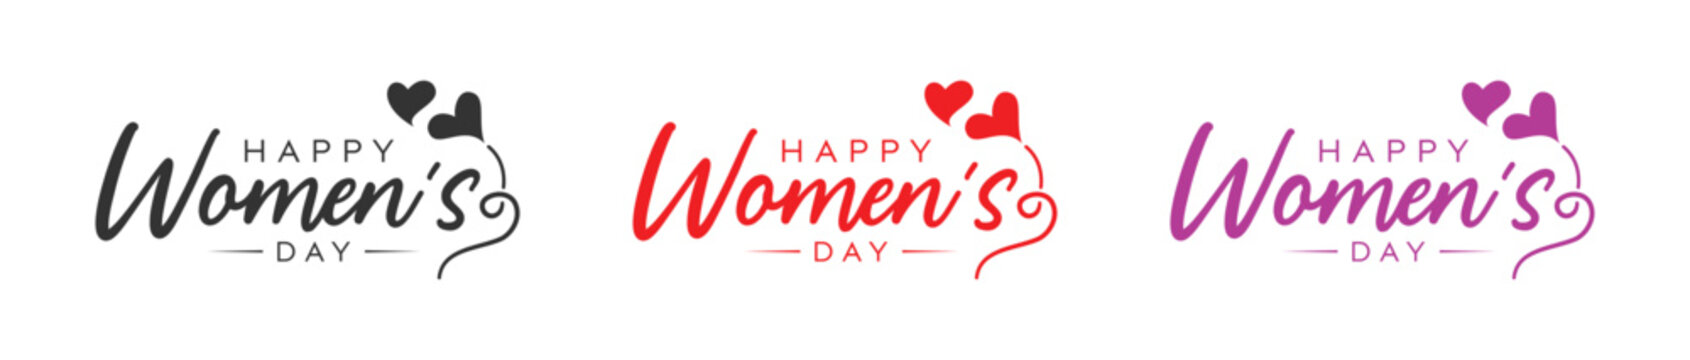 Abstract signature type style happy women's day logo, happy women's day, love logo design